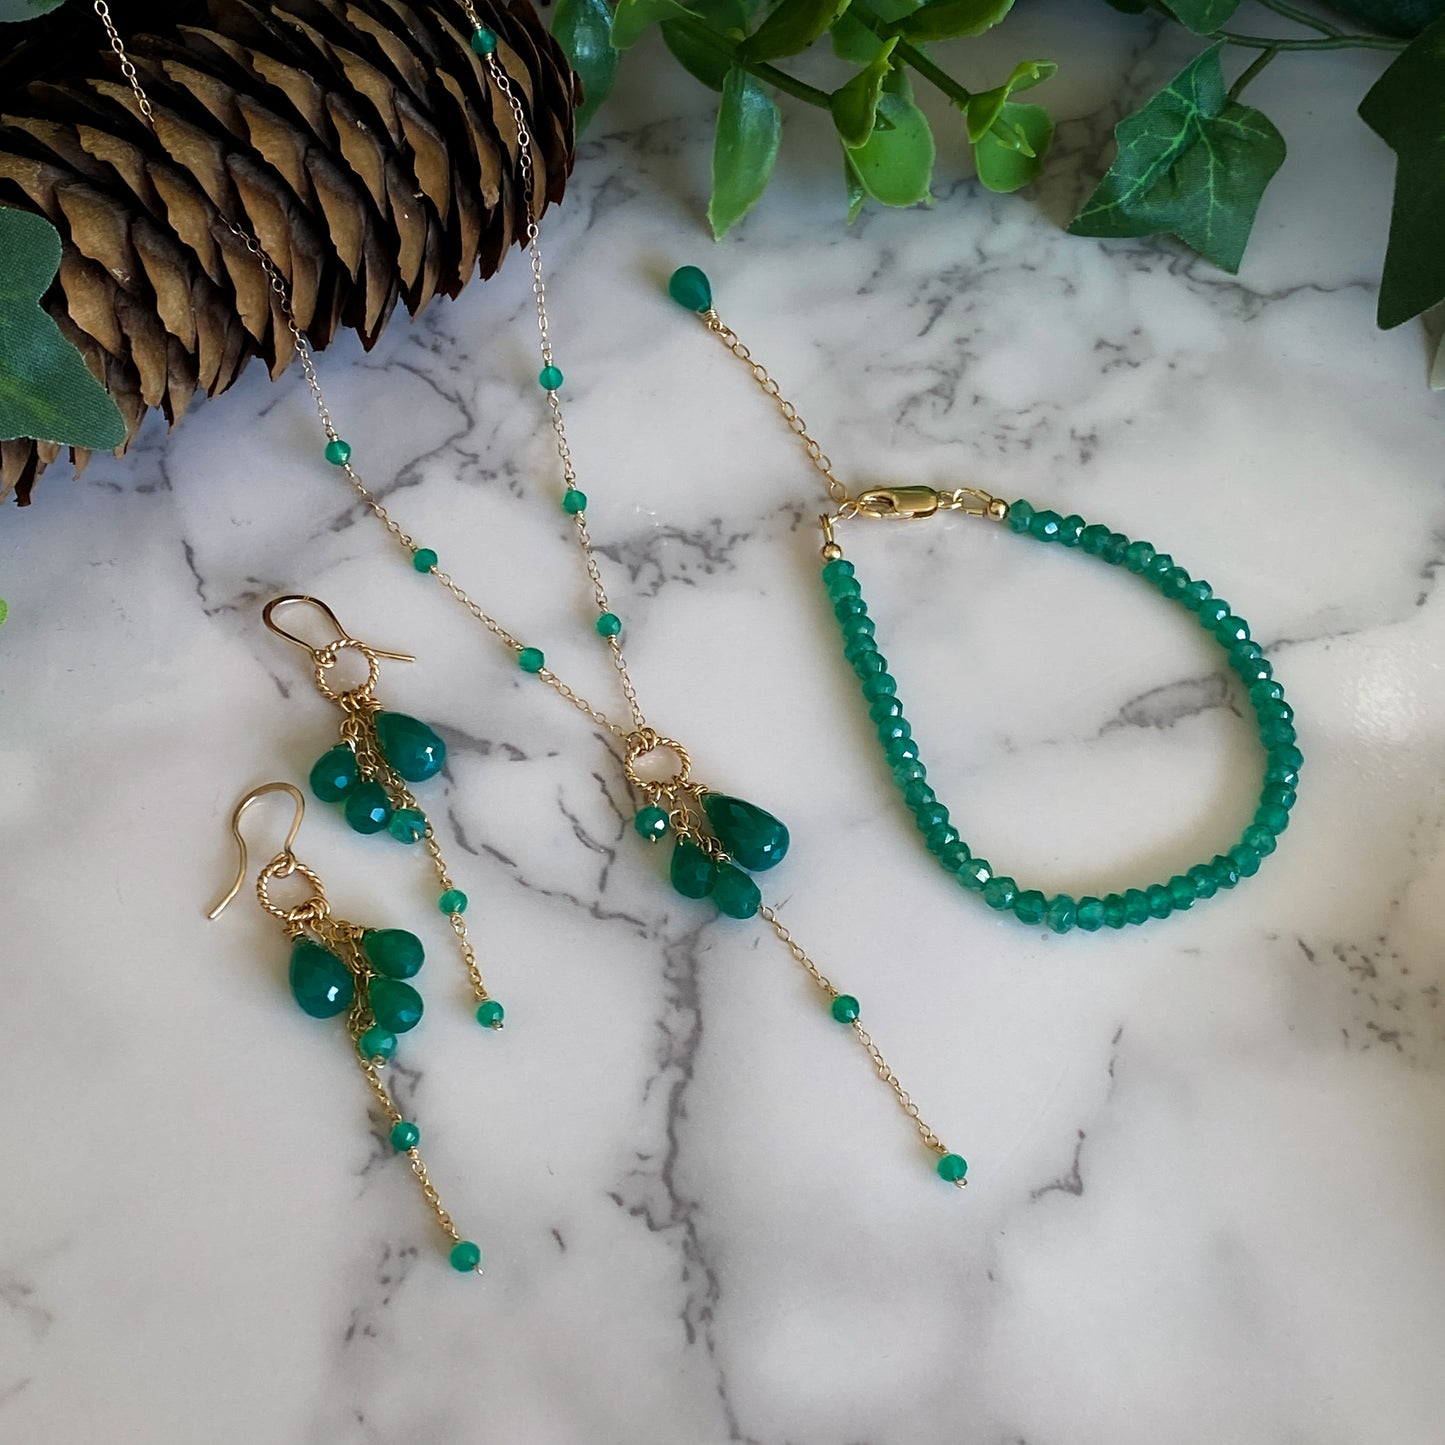 Daphne ~ Faceted Green Onyx and 14k Gold Filled Beaded Bracelet